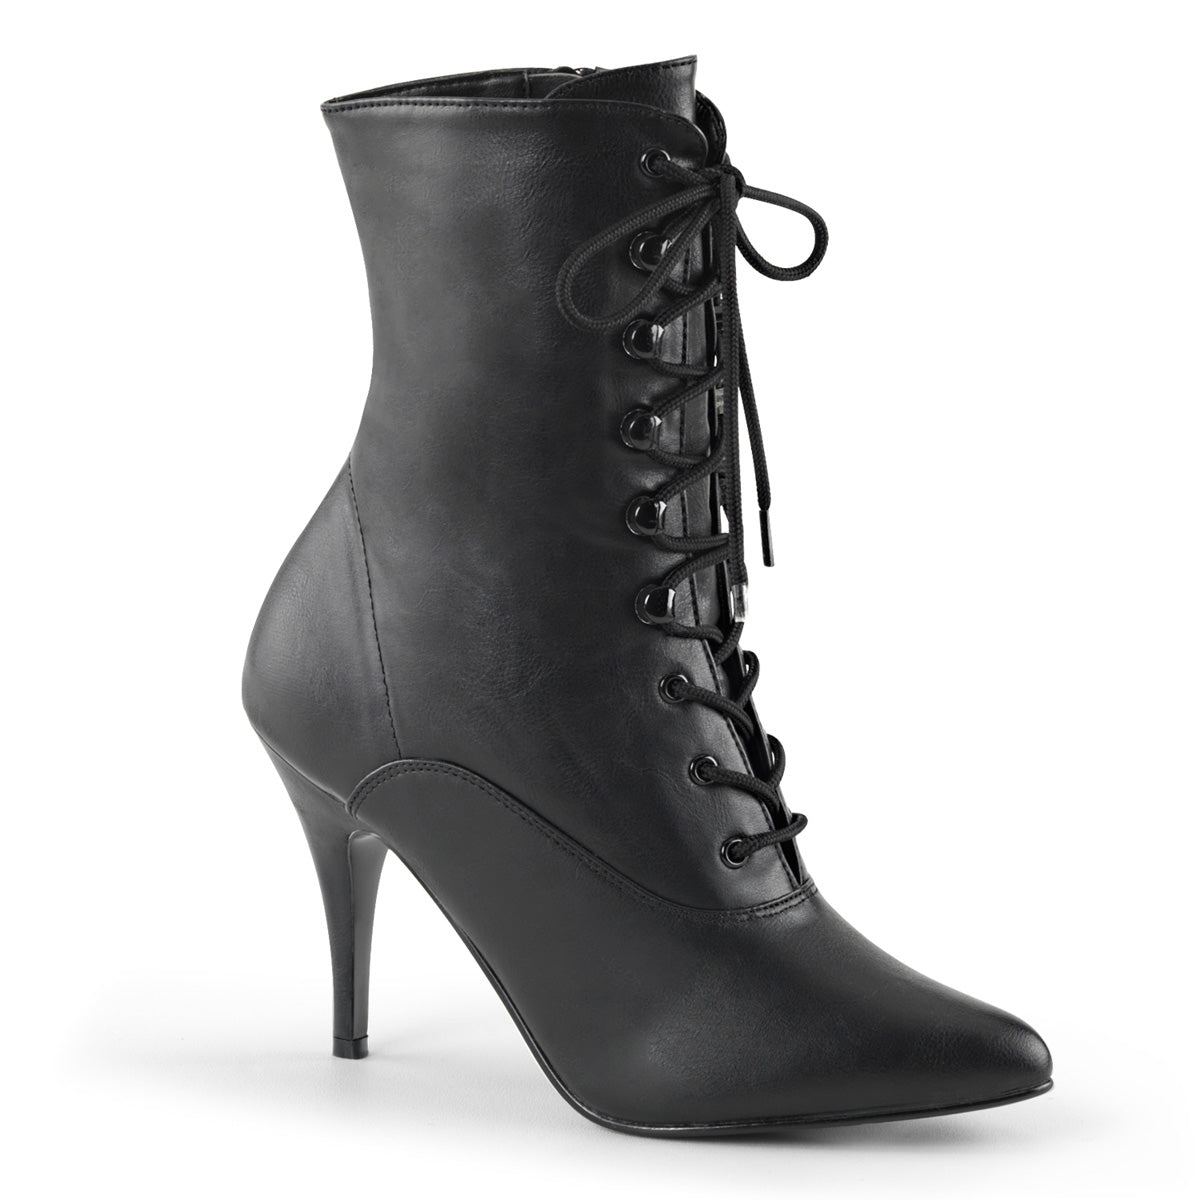 VANITY-1020 Black Faux Leather Ankle Boot